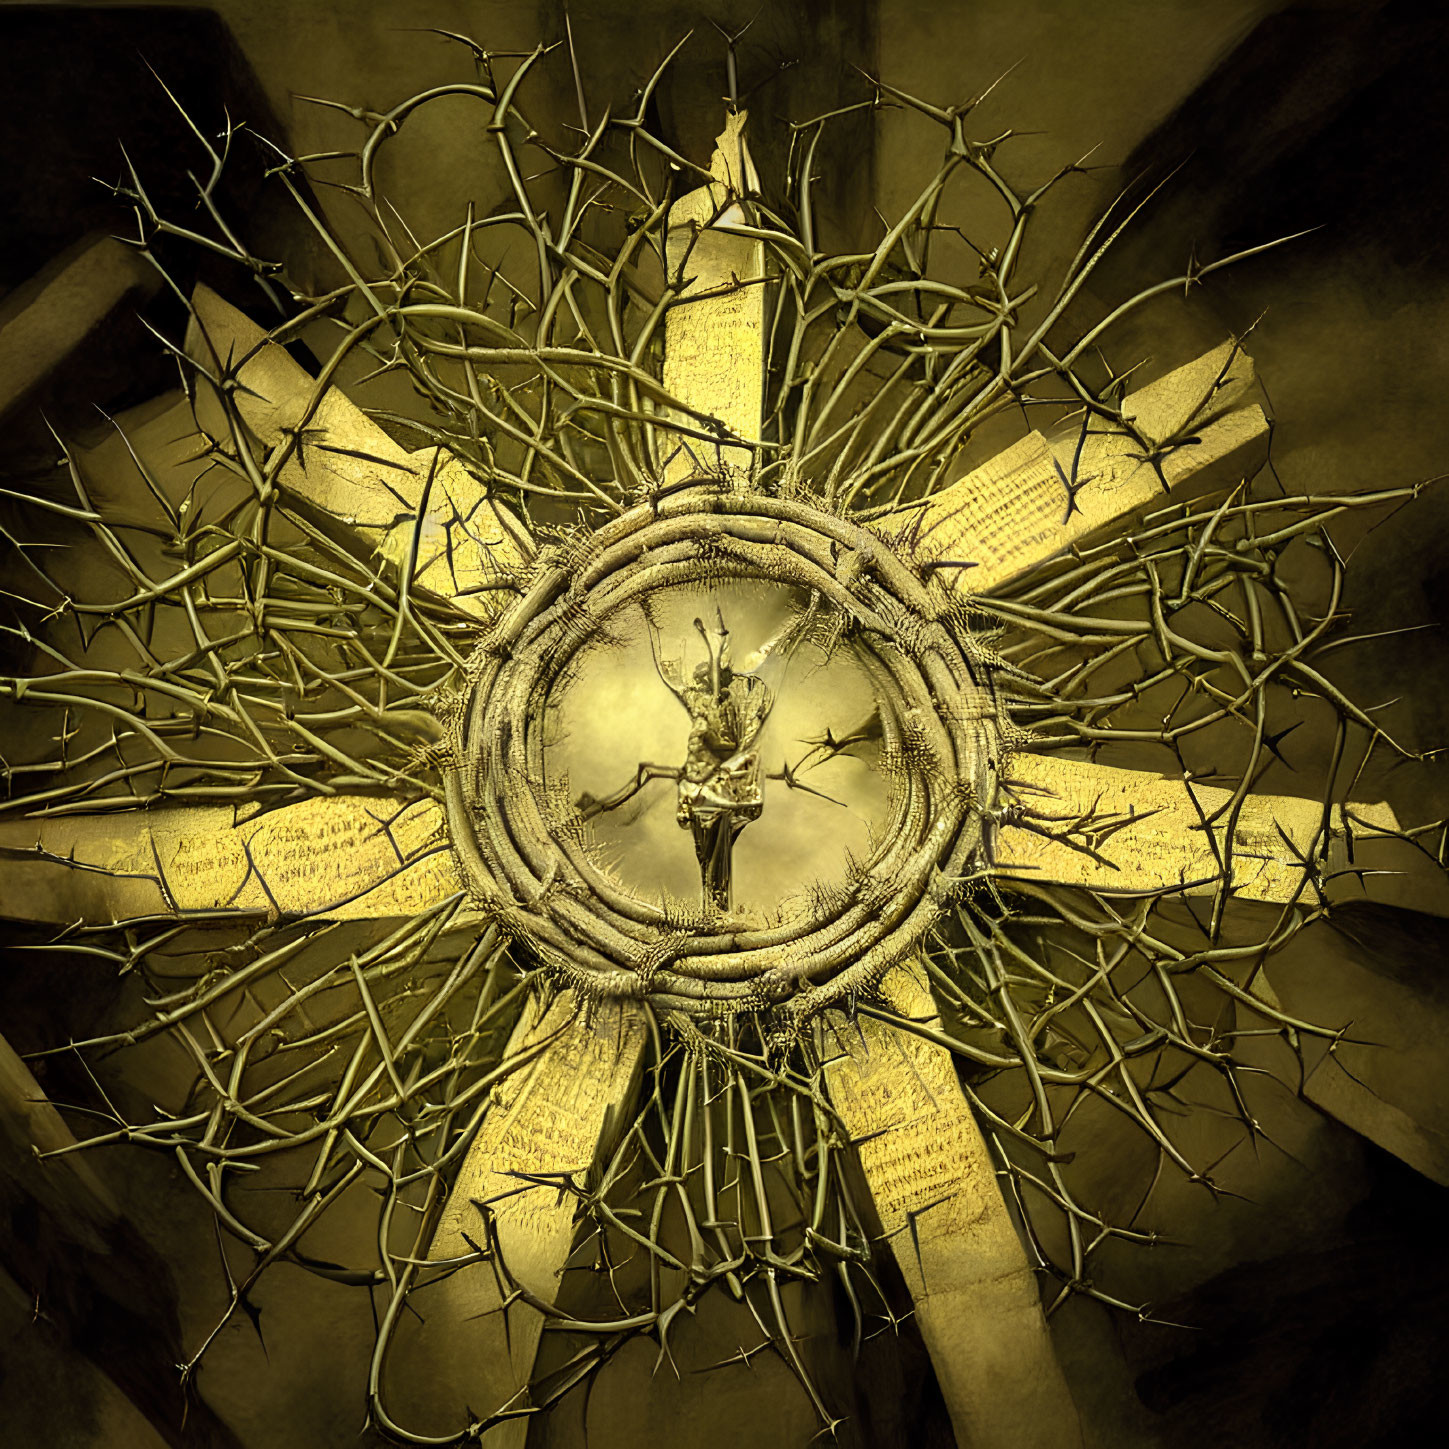 Sepia-toned art: Jesus on cross with crown of thorns, surrounded by script-covered sun